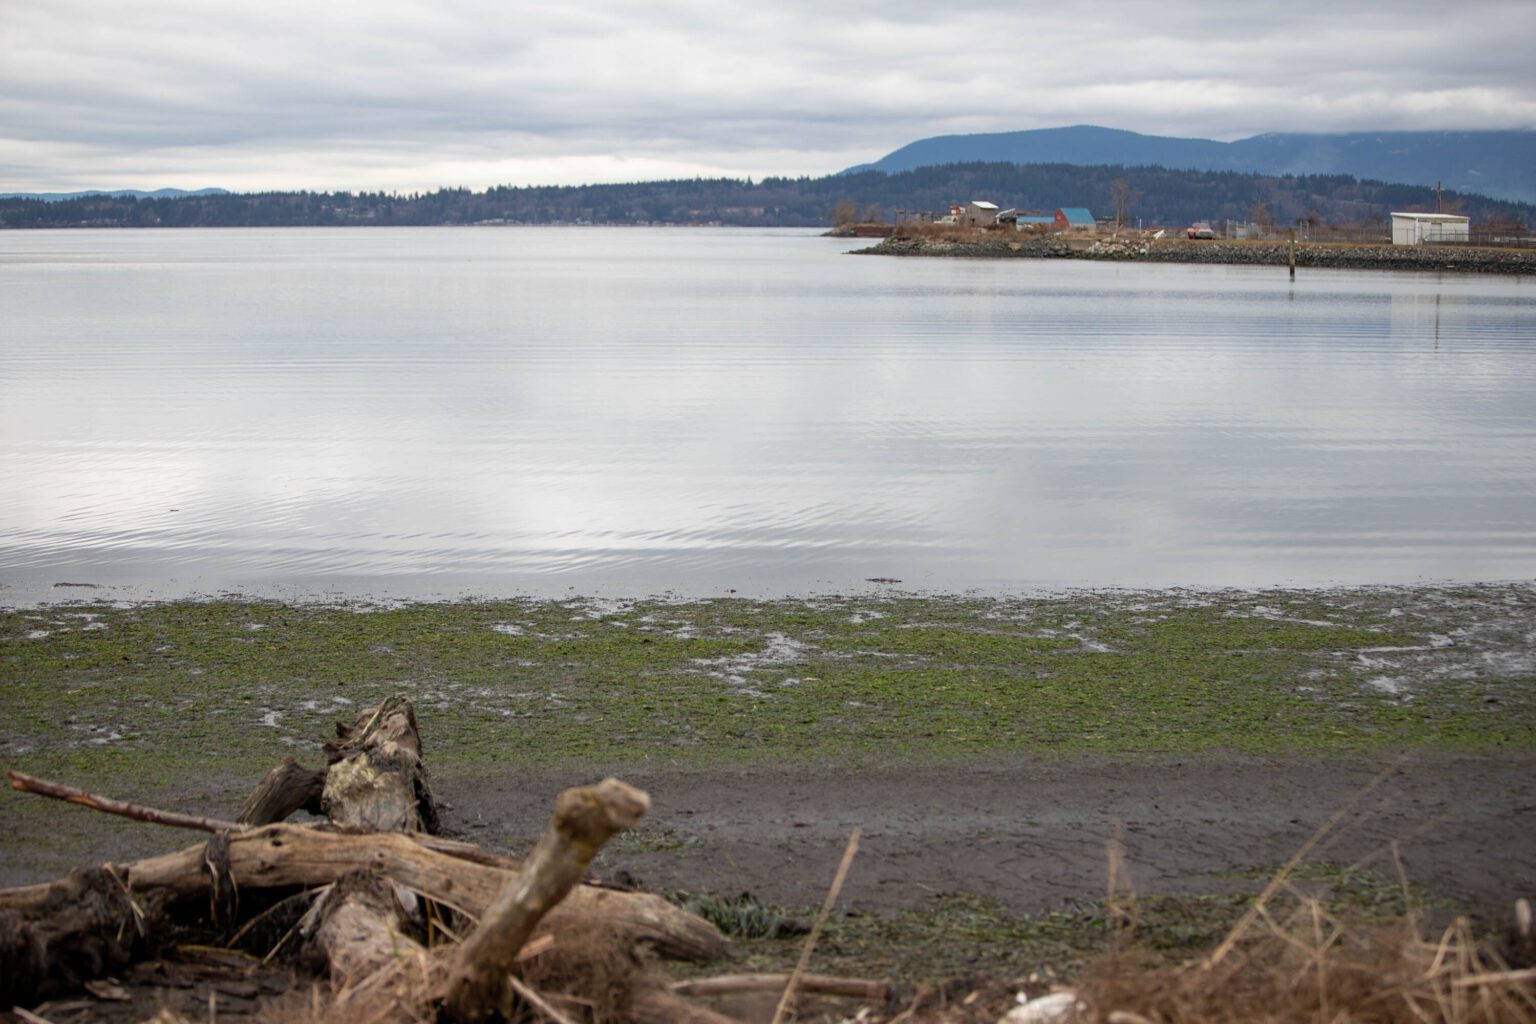 Riley Starks hopes to have permits in hand for a new seaweed farm in Lummi Bay this summer. The permitting process involves nine state agencies and can take years to complete